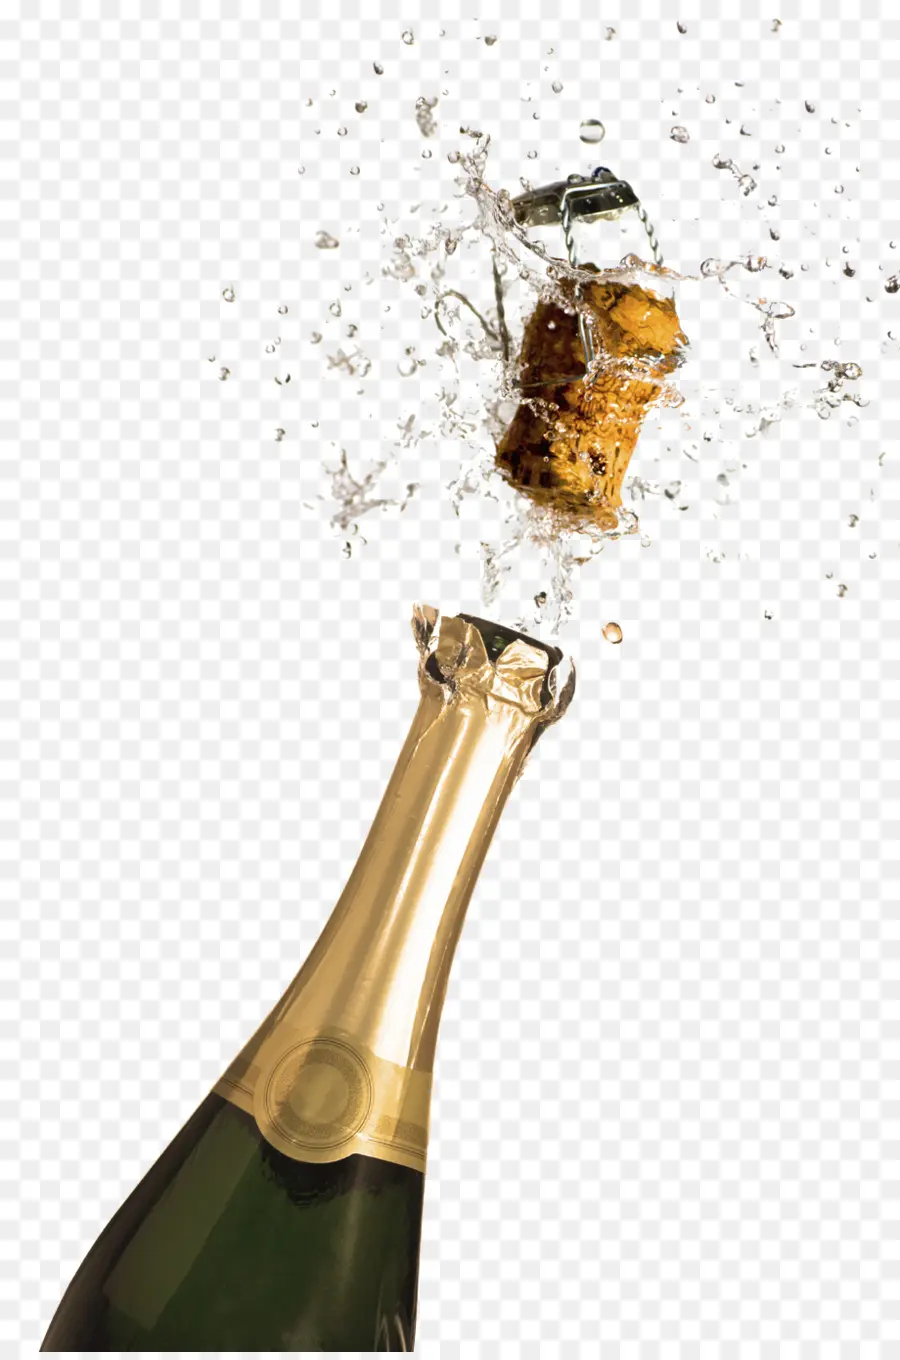 Champagne，Vin PNG